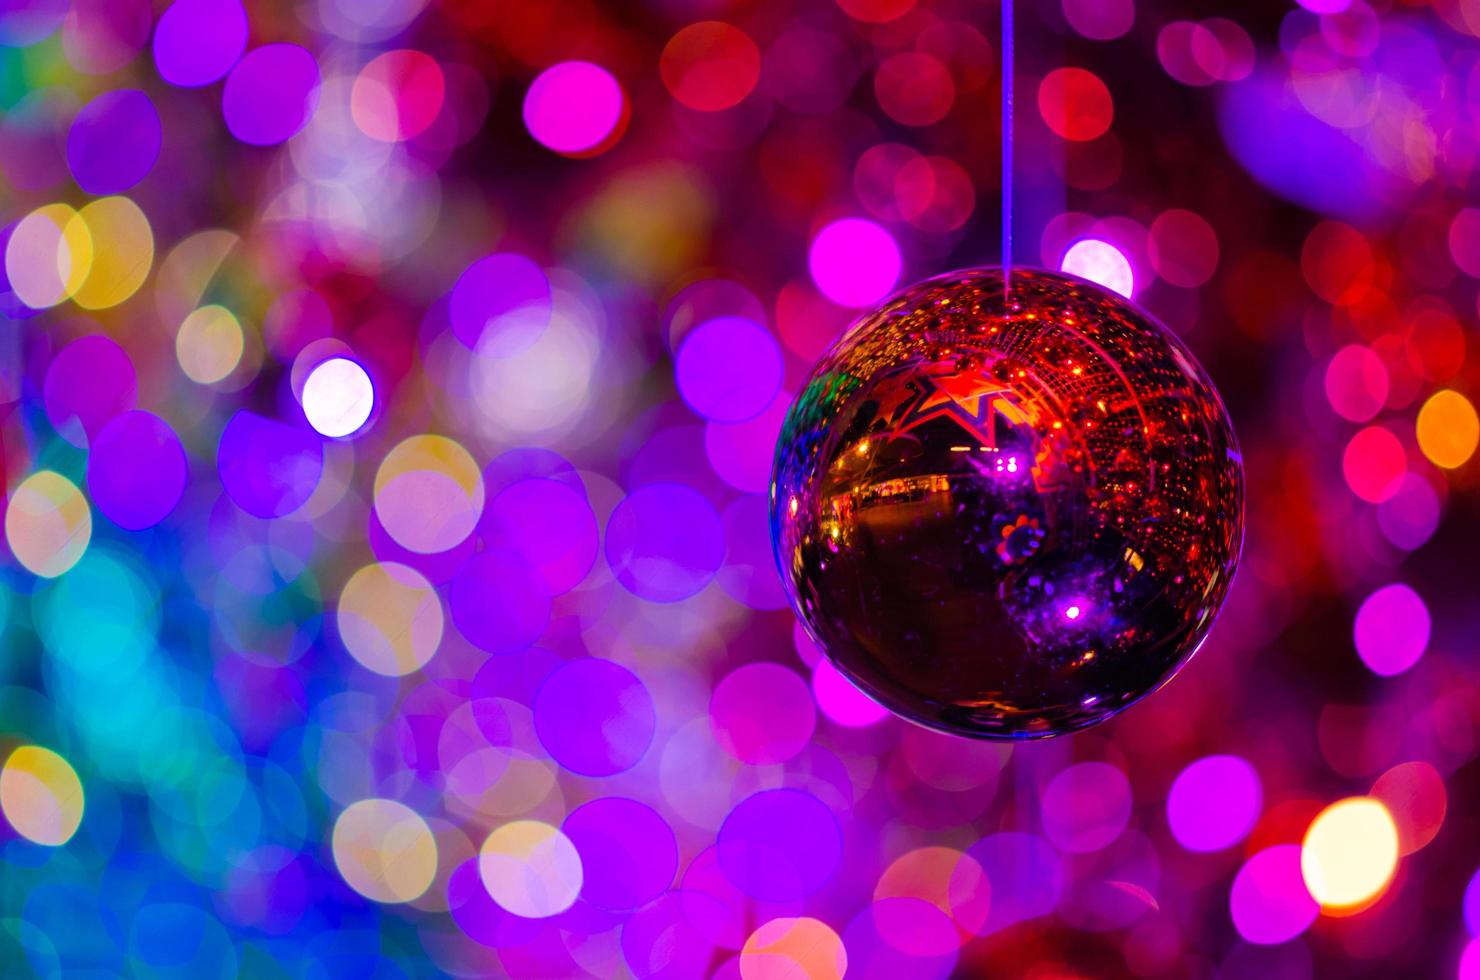 Red bauble hanging to decorate for Christmas holiday with colorful bokeh from light and other baubles. photo